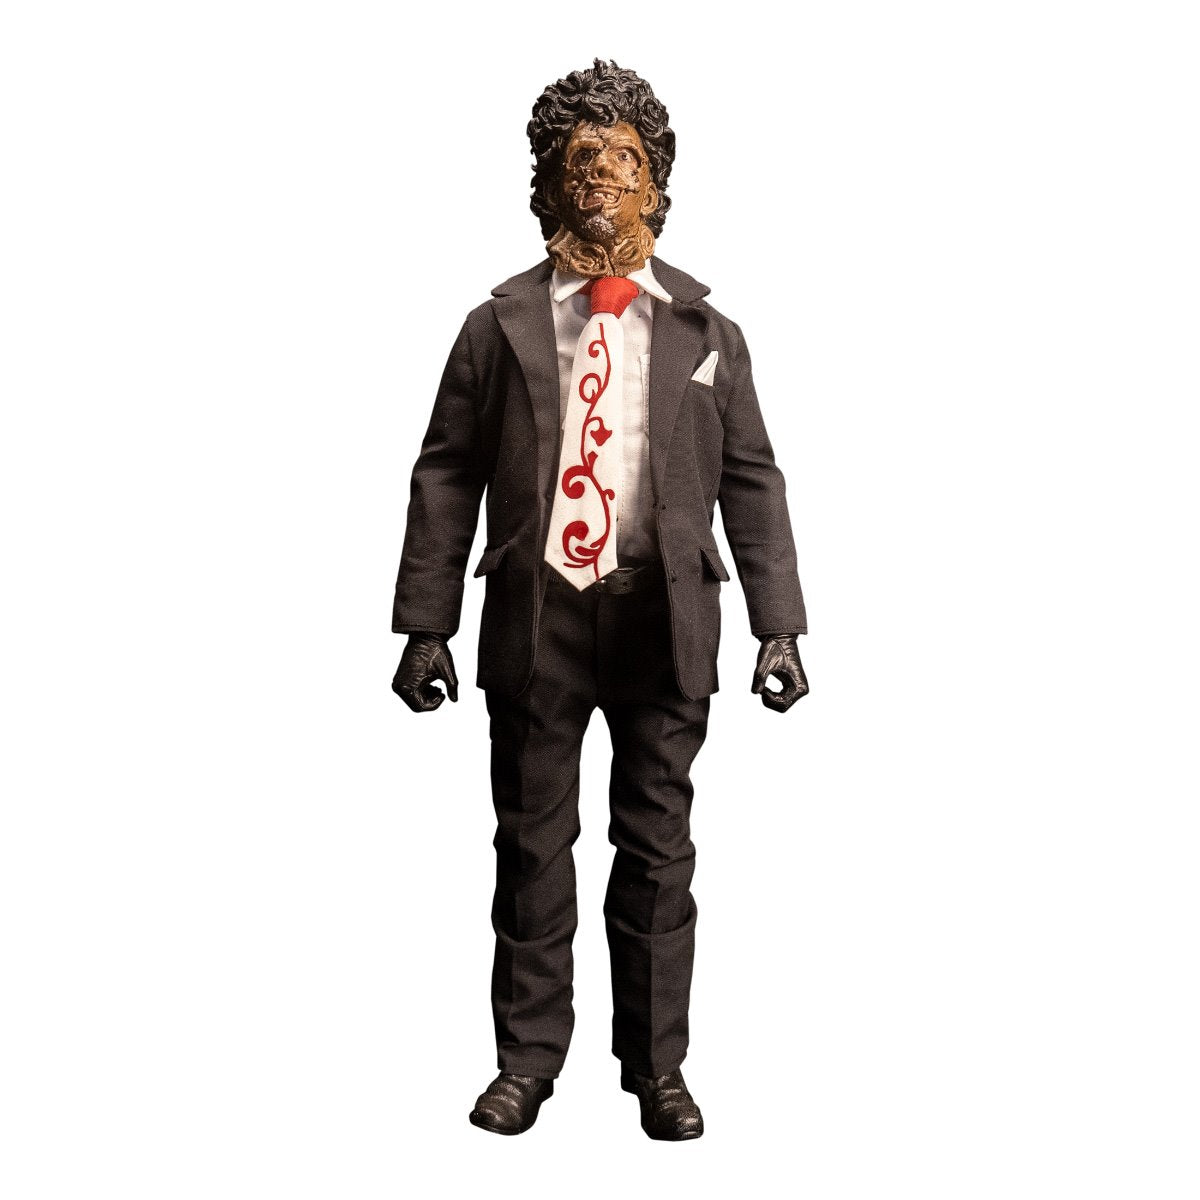 The Texas Chainsaw Massacre 2 Leatherface 1:6 Scale Action Figure Trick or Treat Studios